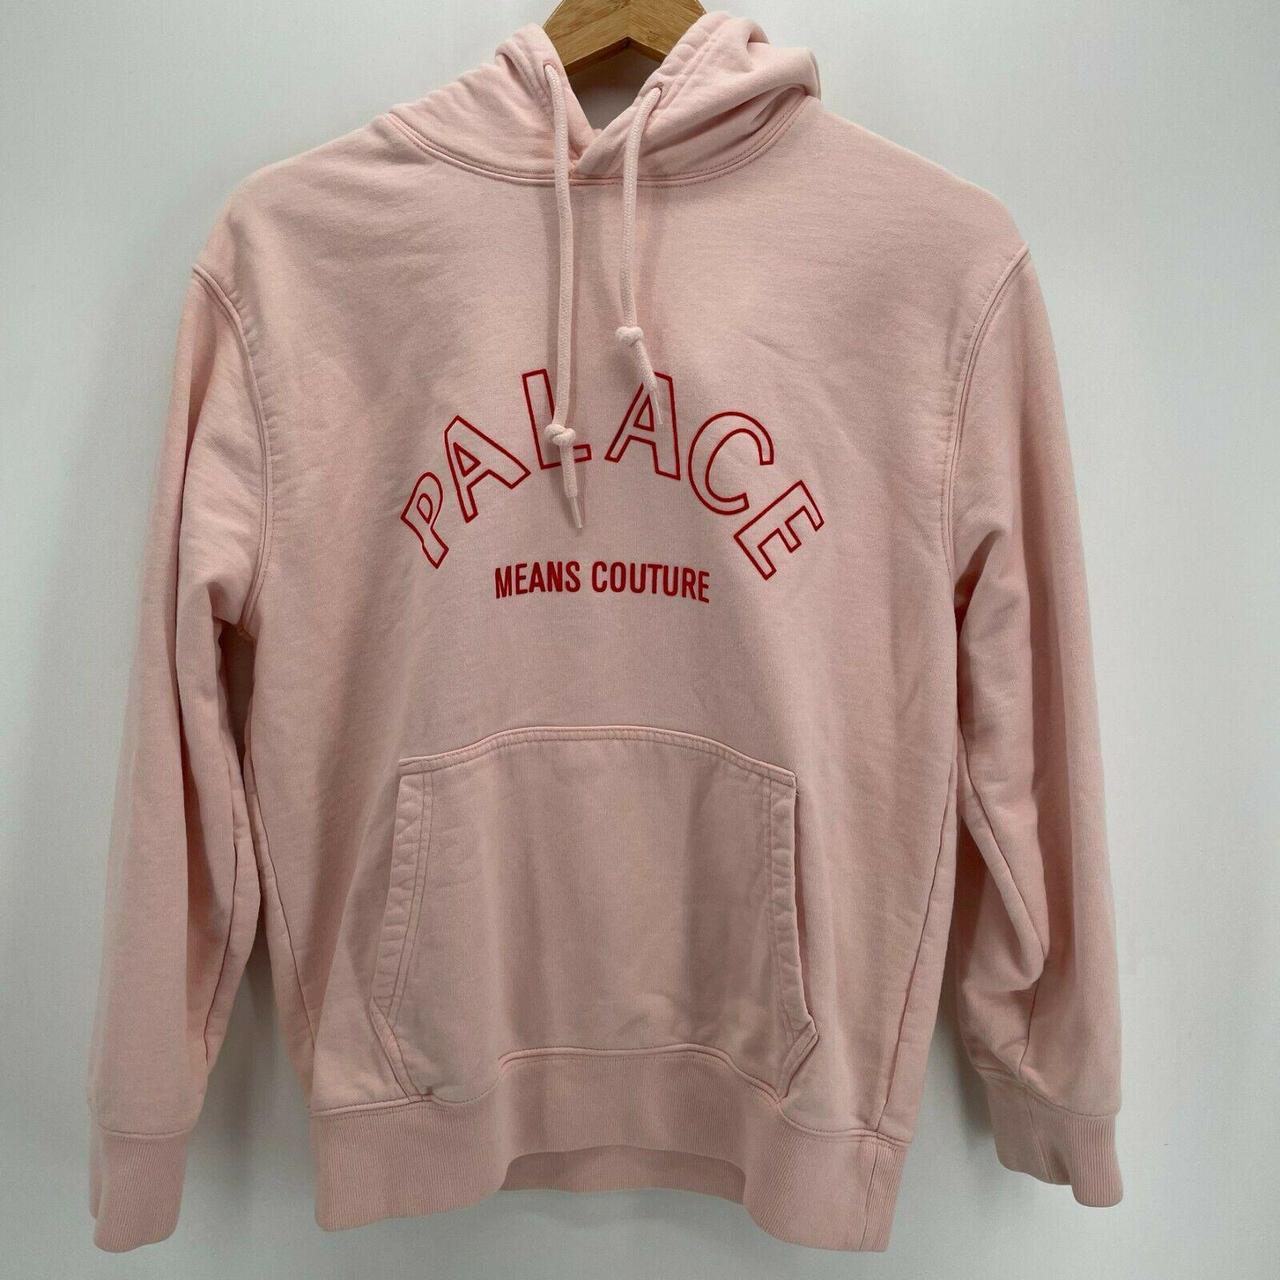 Product Image 1 - Palace Means Couture Hoodie Men's